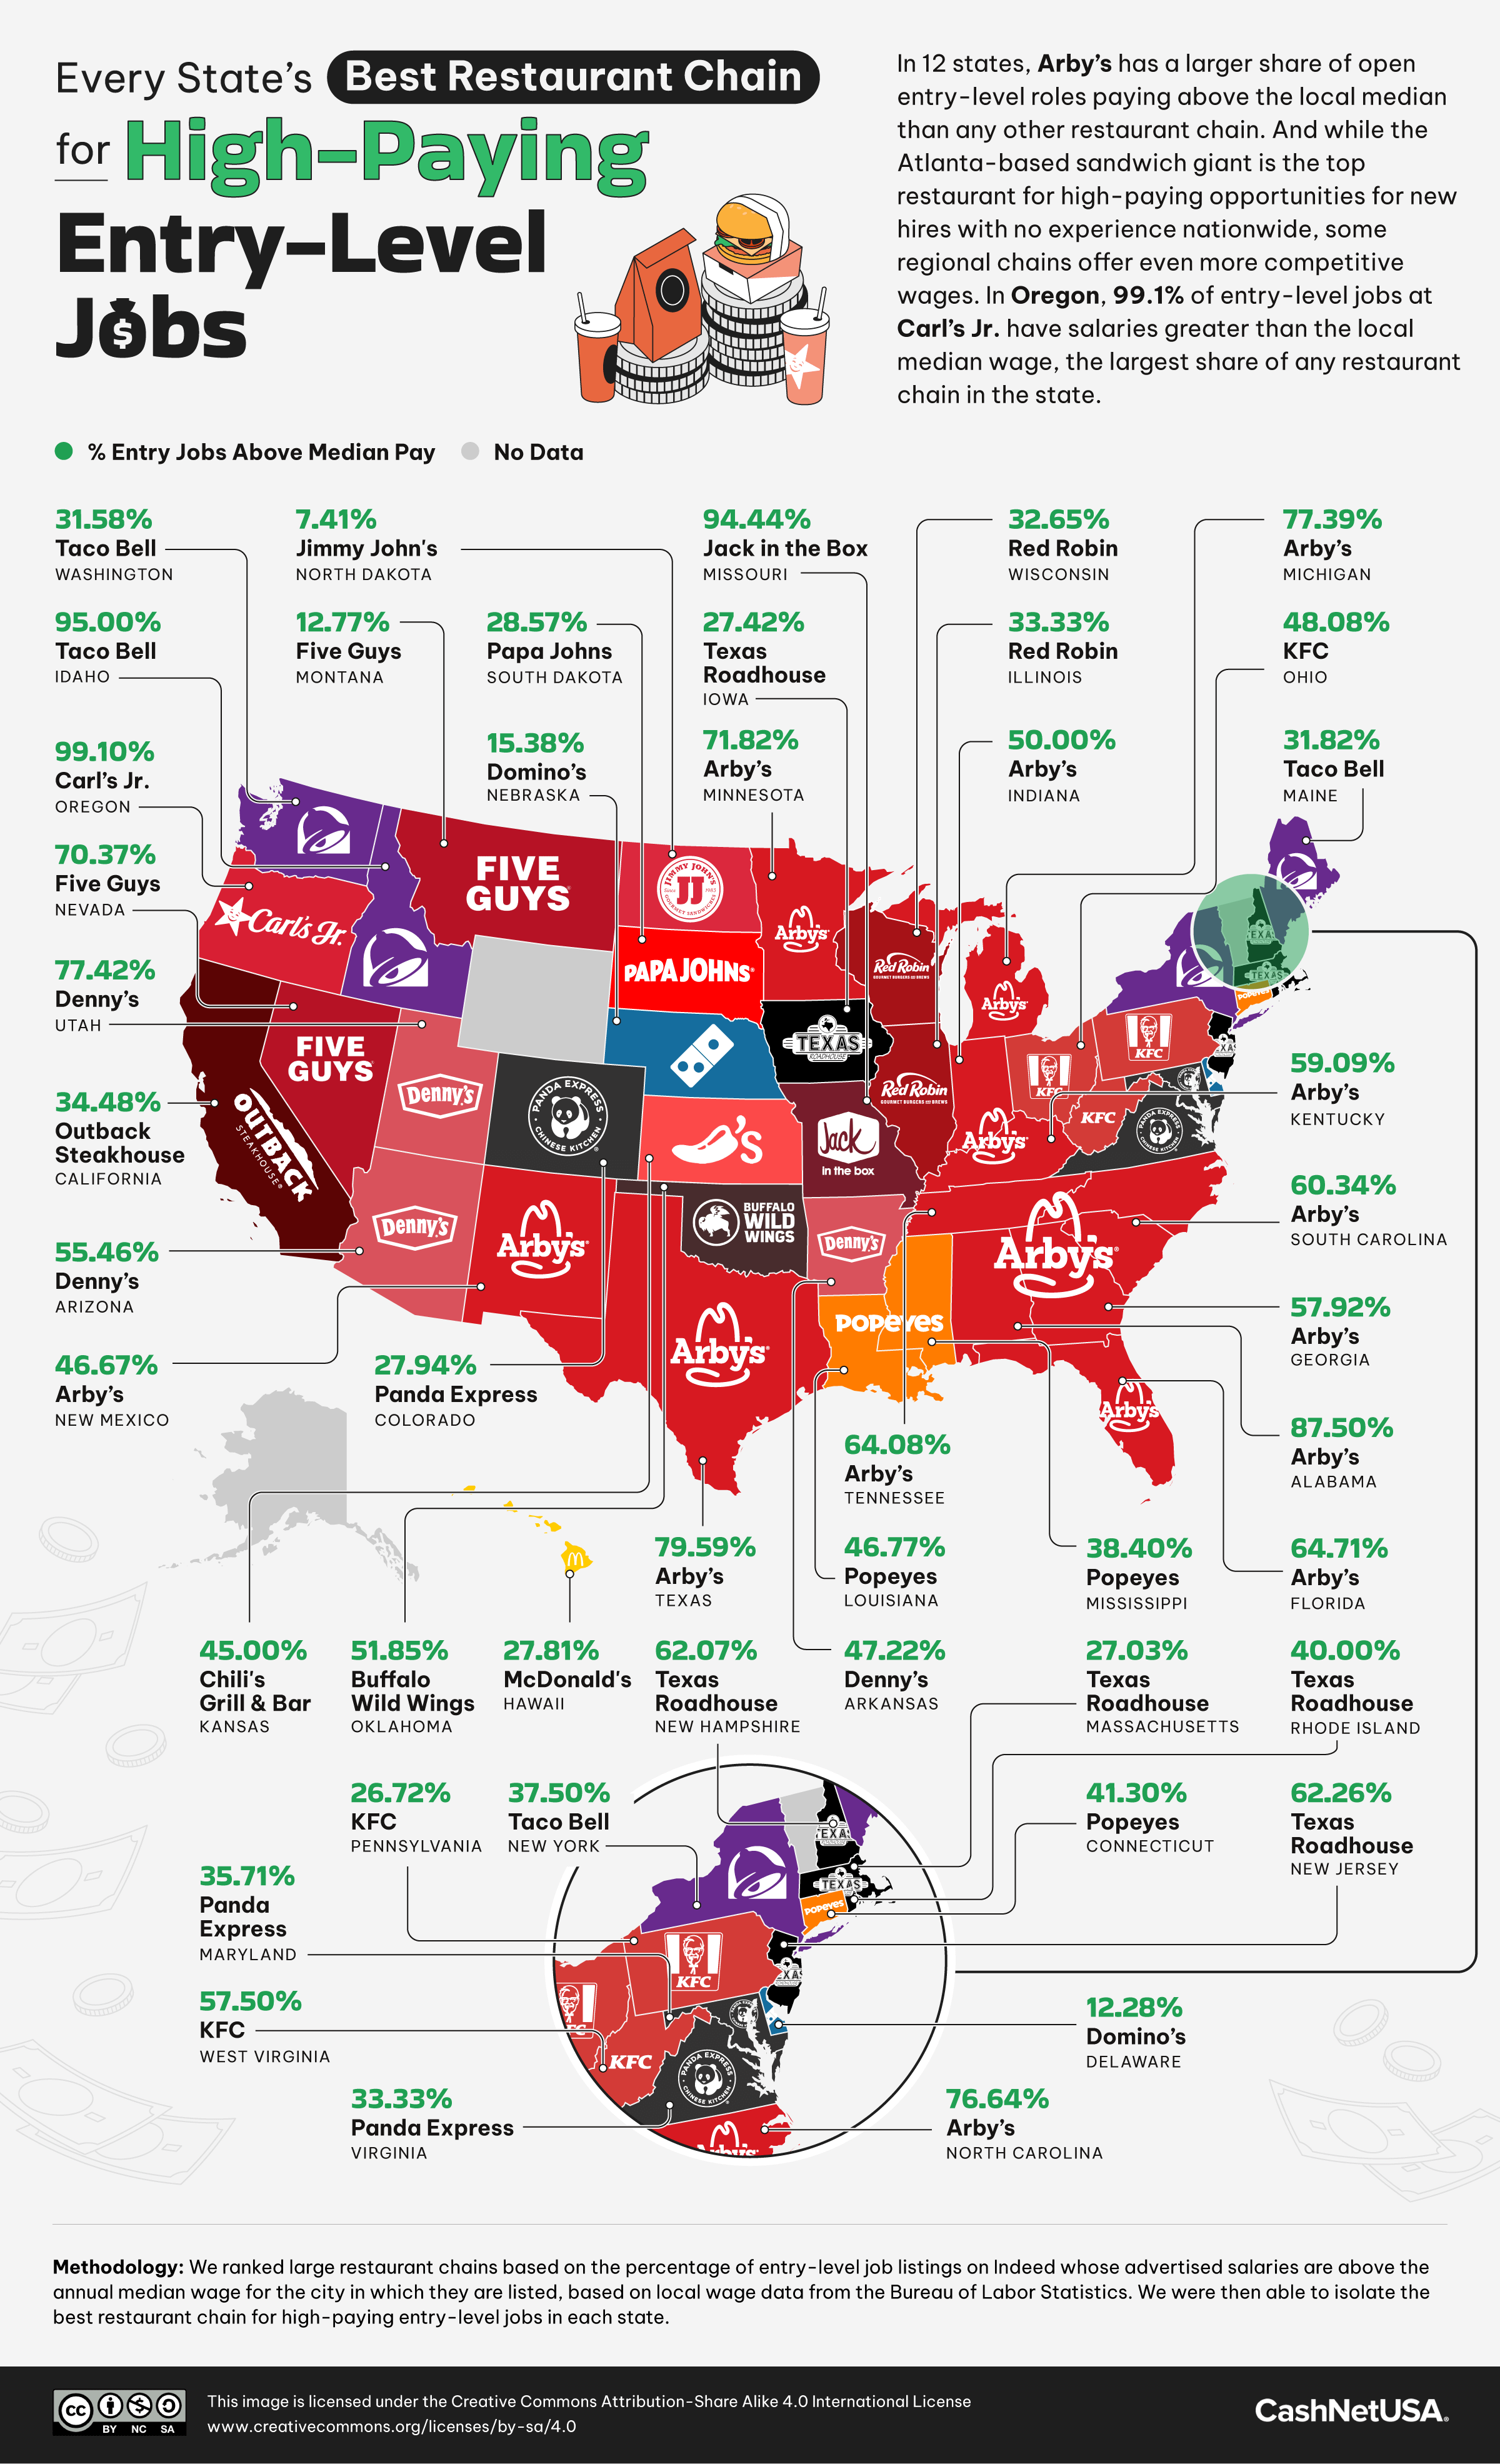 U.S. map showing the restaurant chain with the highest paying entry level jobs in each state